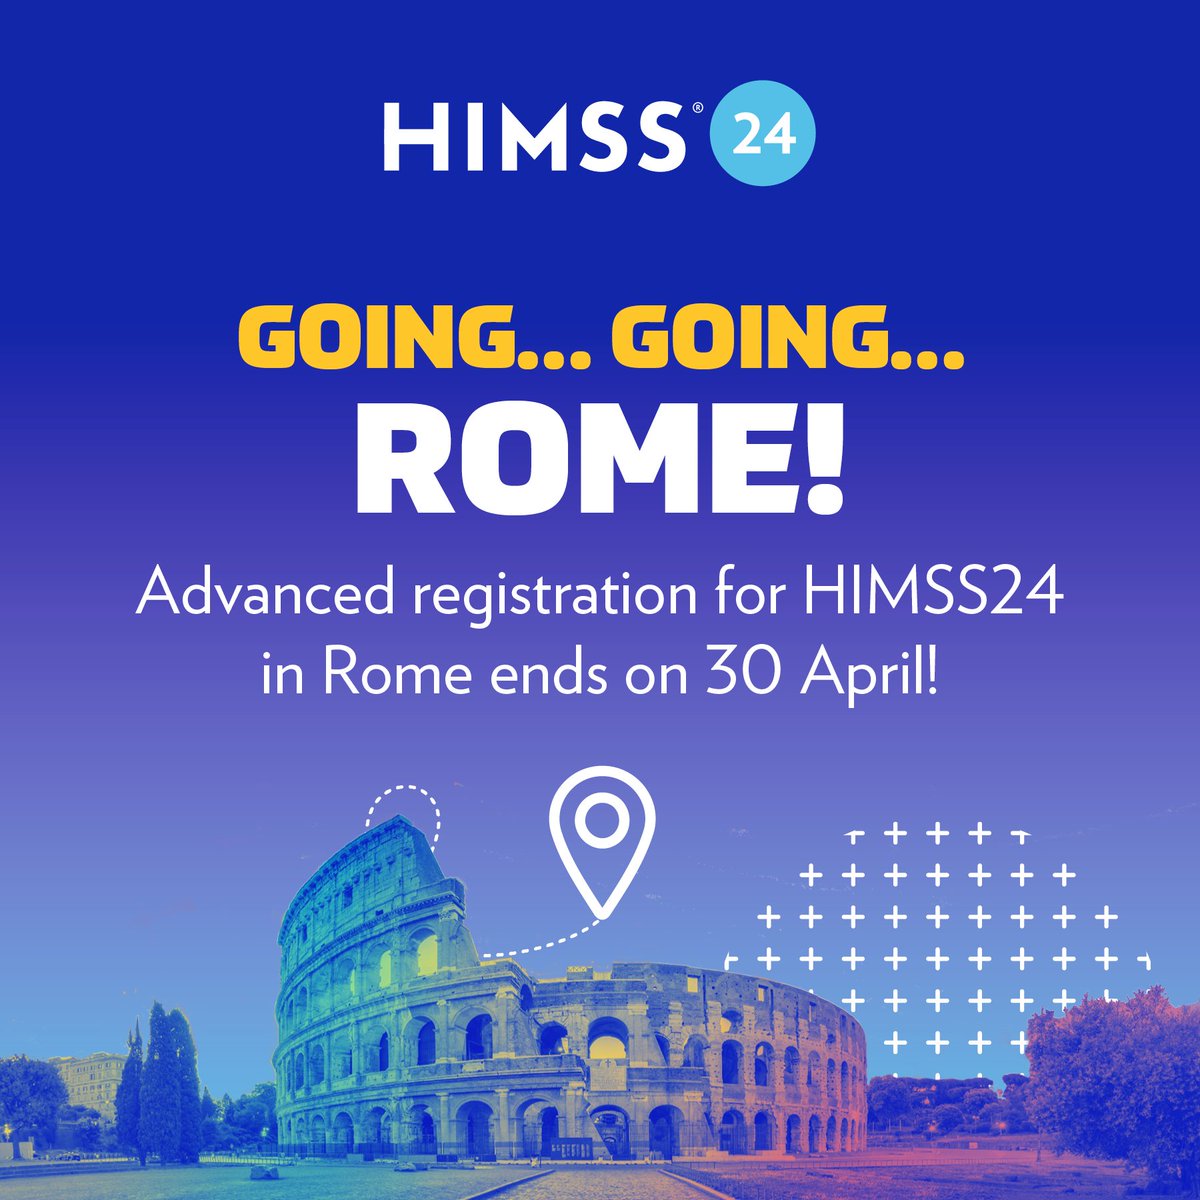 Act fast! Advanced registration for #HIMSS24Europe ends at midnight on 30 April. ⏰ Register to join us, and together we'll shape the future of healthcare. 💙 bit.ly/48AMlpk